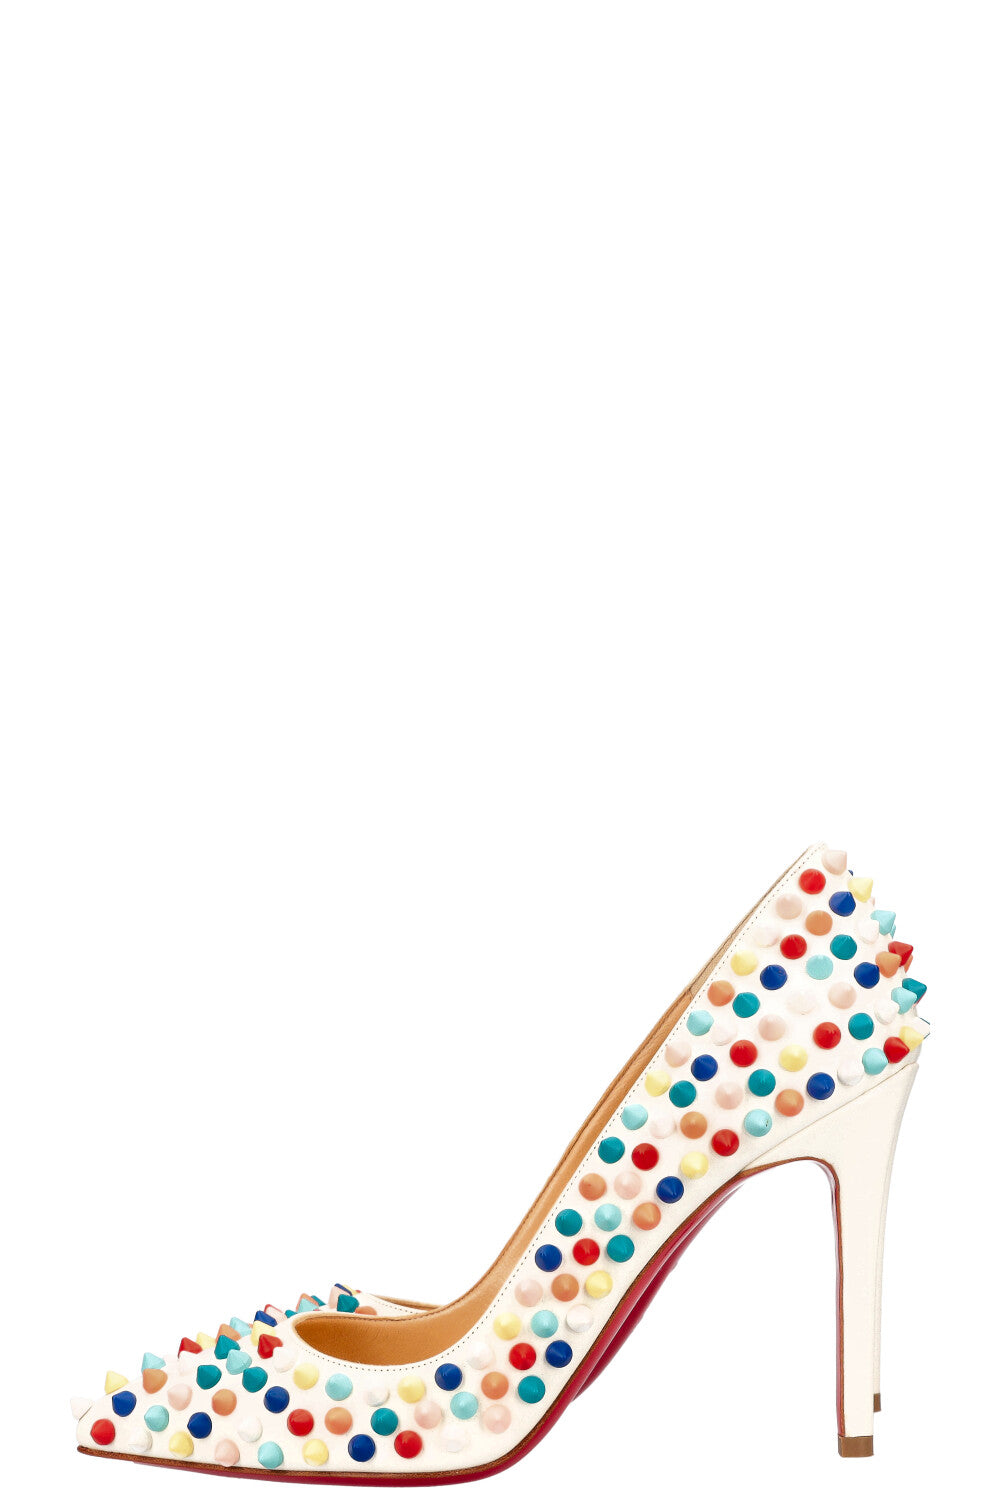 CHRISTIAN LOUBOUTIN Pointes Pigalle Multicolore